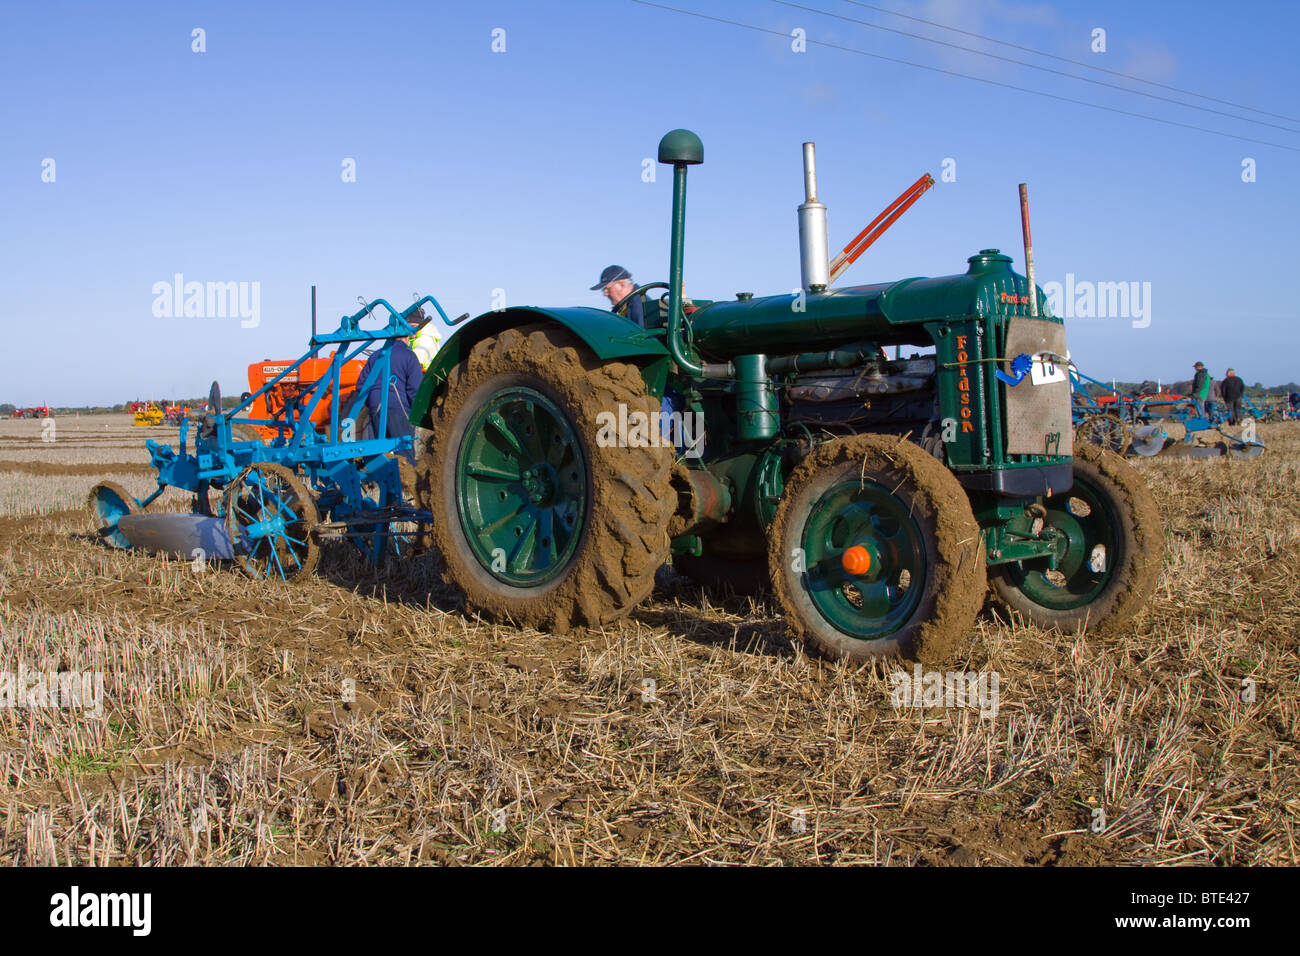 fordson tractor Stock Photo